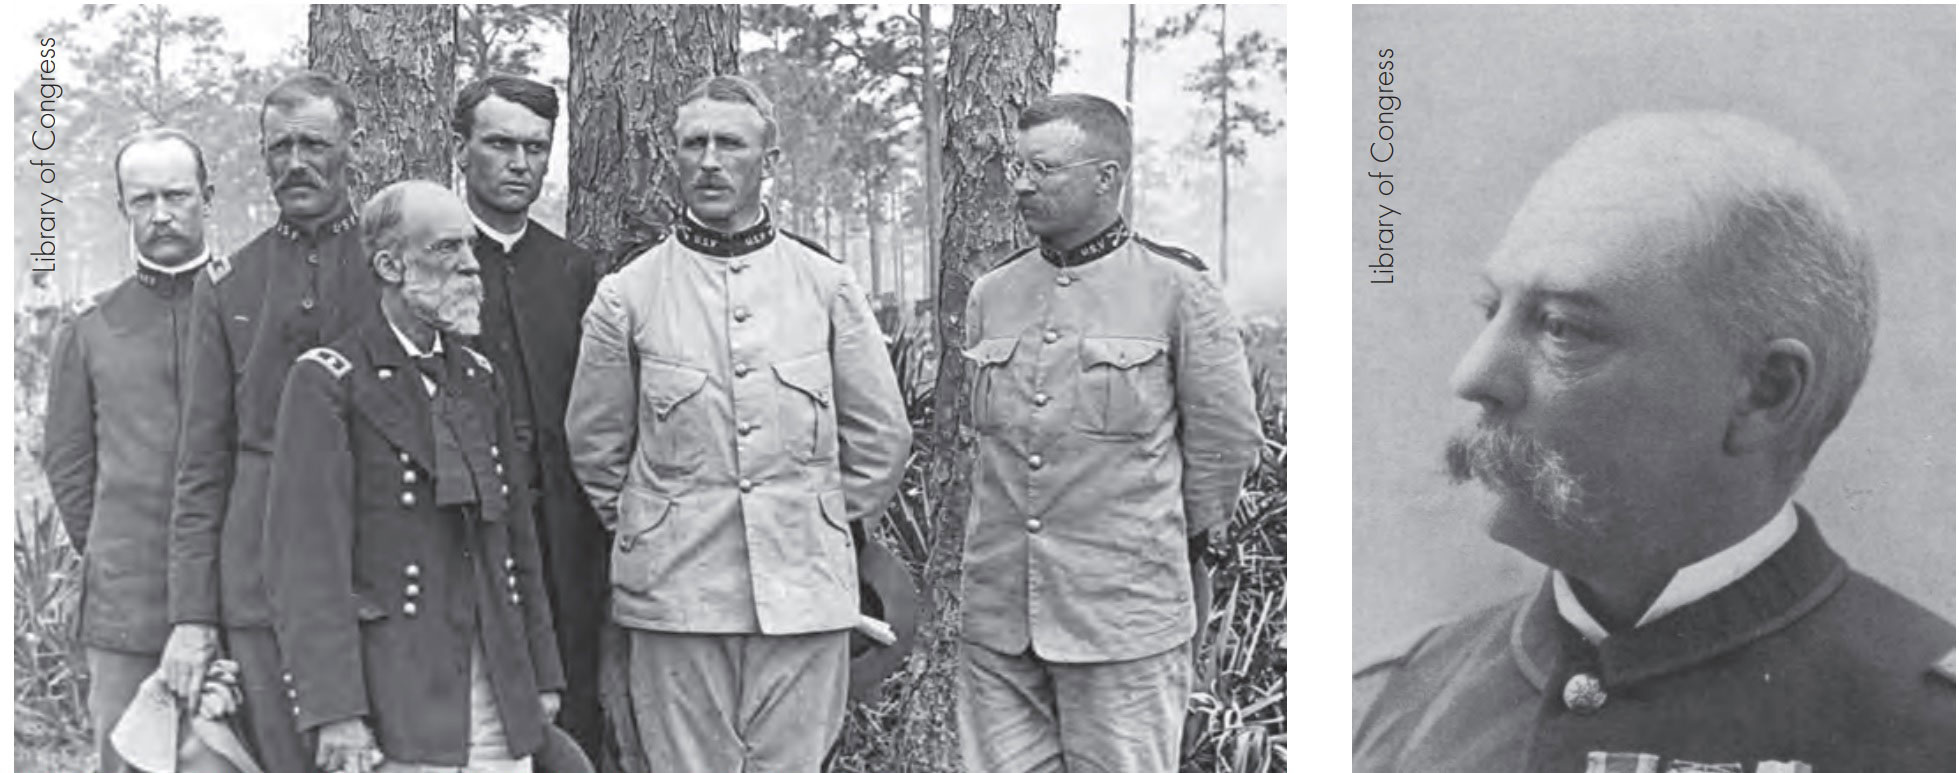 Image left: Staff of the 1st United States Volunteer Cavalry in Tampa, c. 1898. From left: Taylor MacDonald, Maj. Alexander Oswald Brodie, General Wheeler, unidentified officer, Colonel Wood, and Colonel Roosevelt. Image right: General Wade